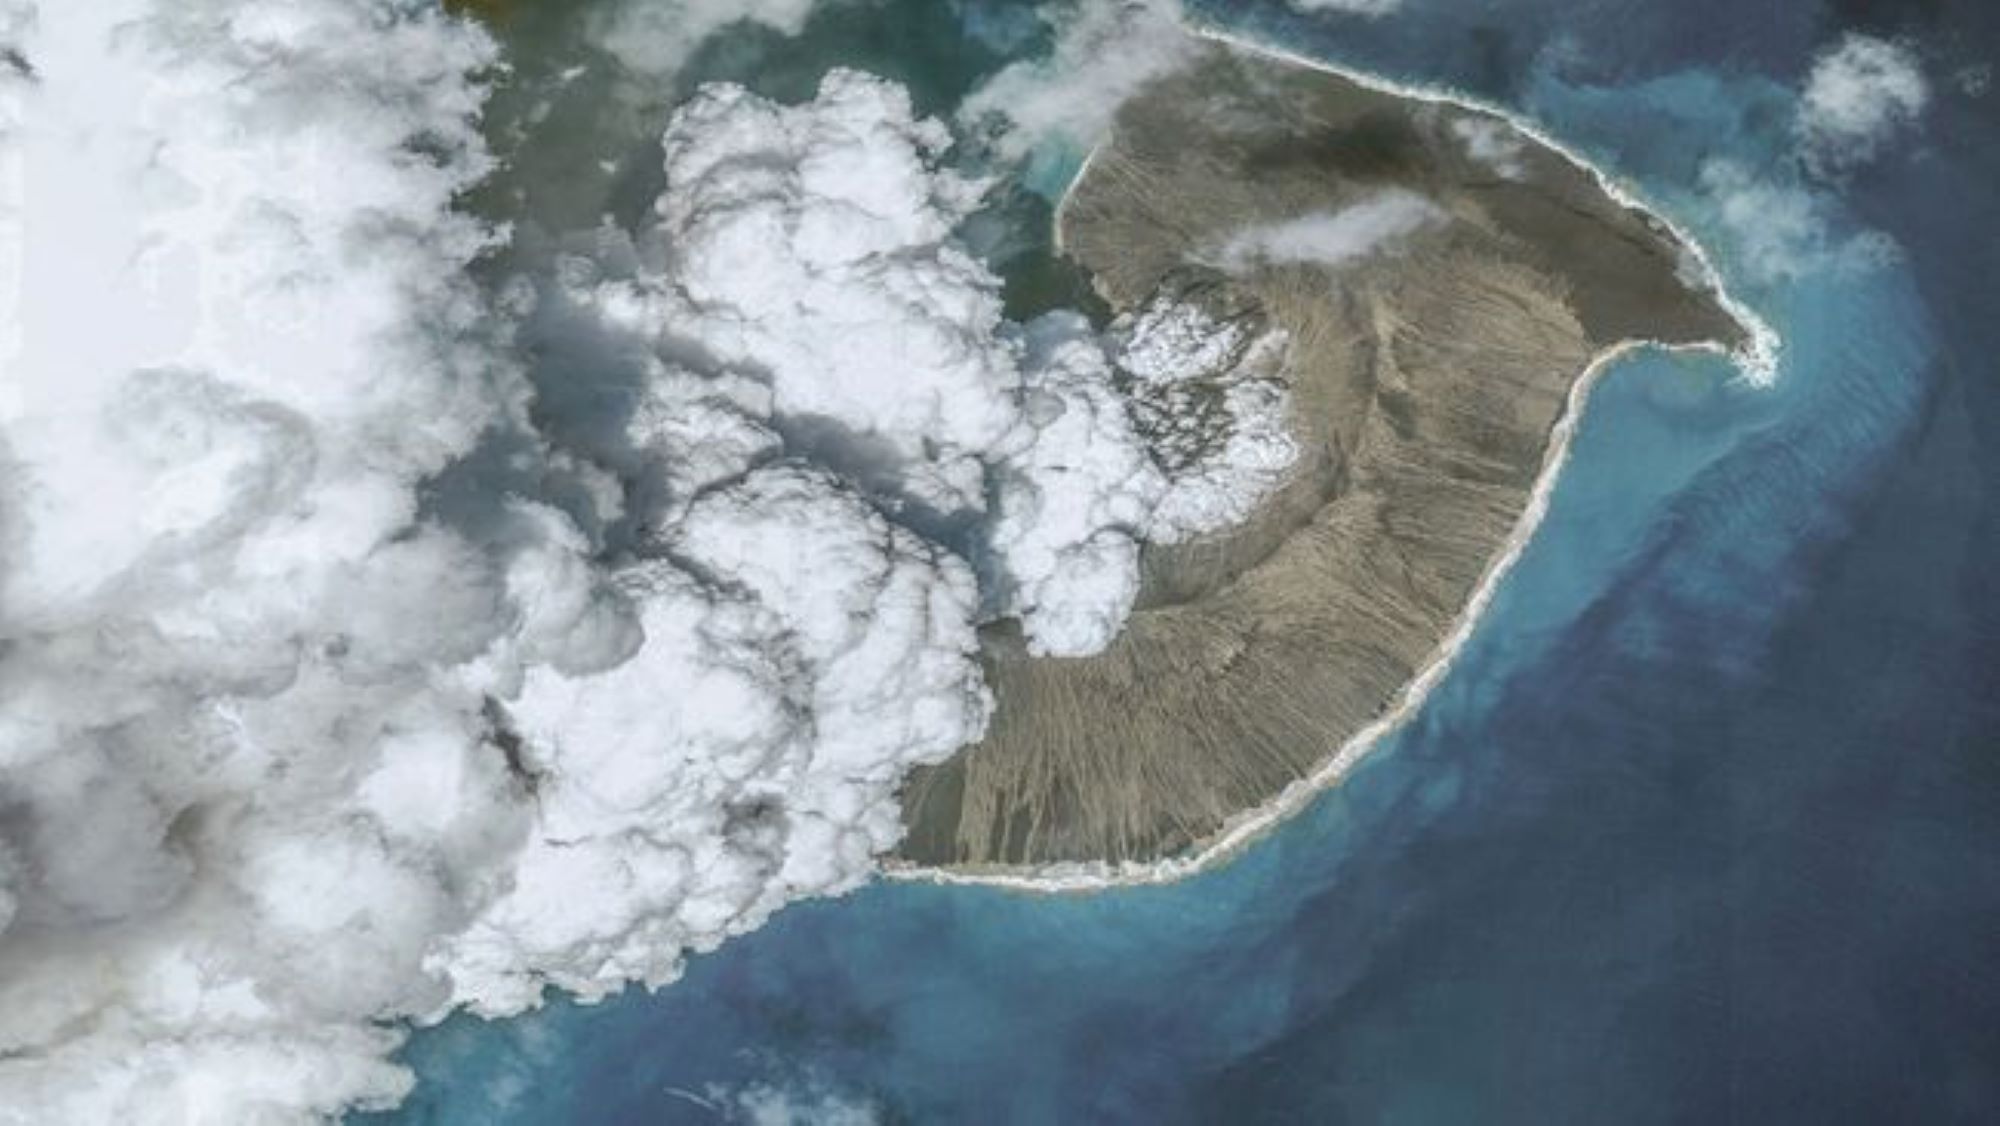 An aerial view of the Tonga volcano eruption in 2022. We see vapor and ash rising from a volcano surrounded by water.